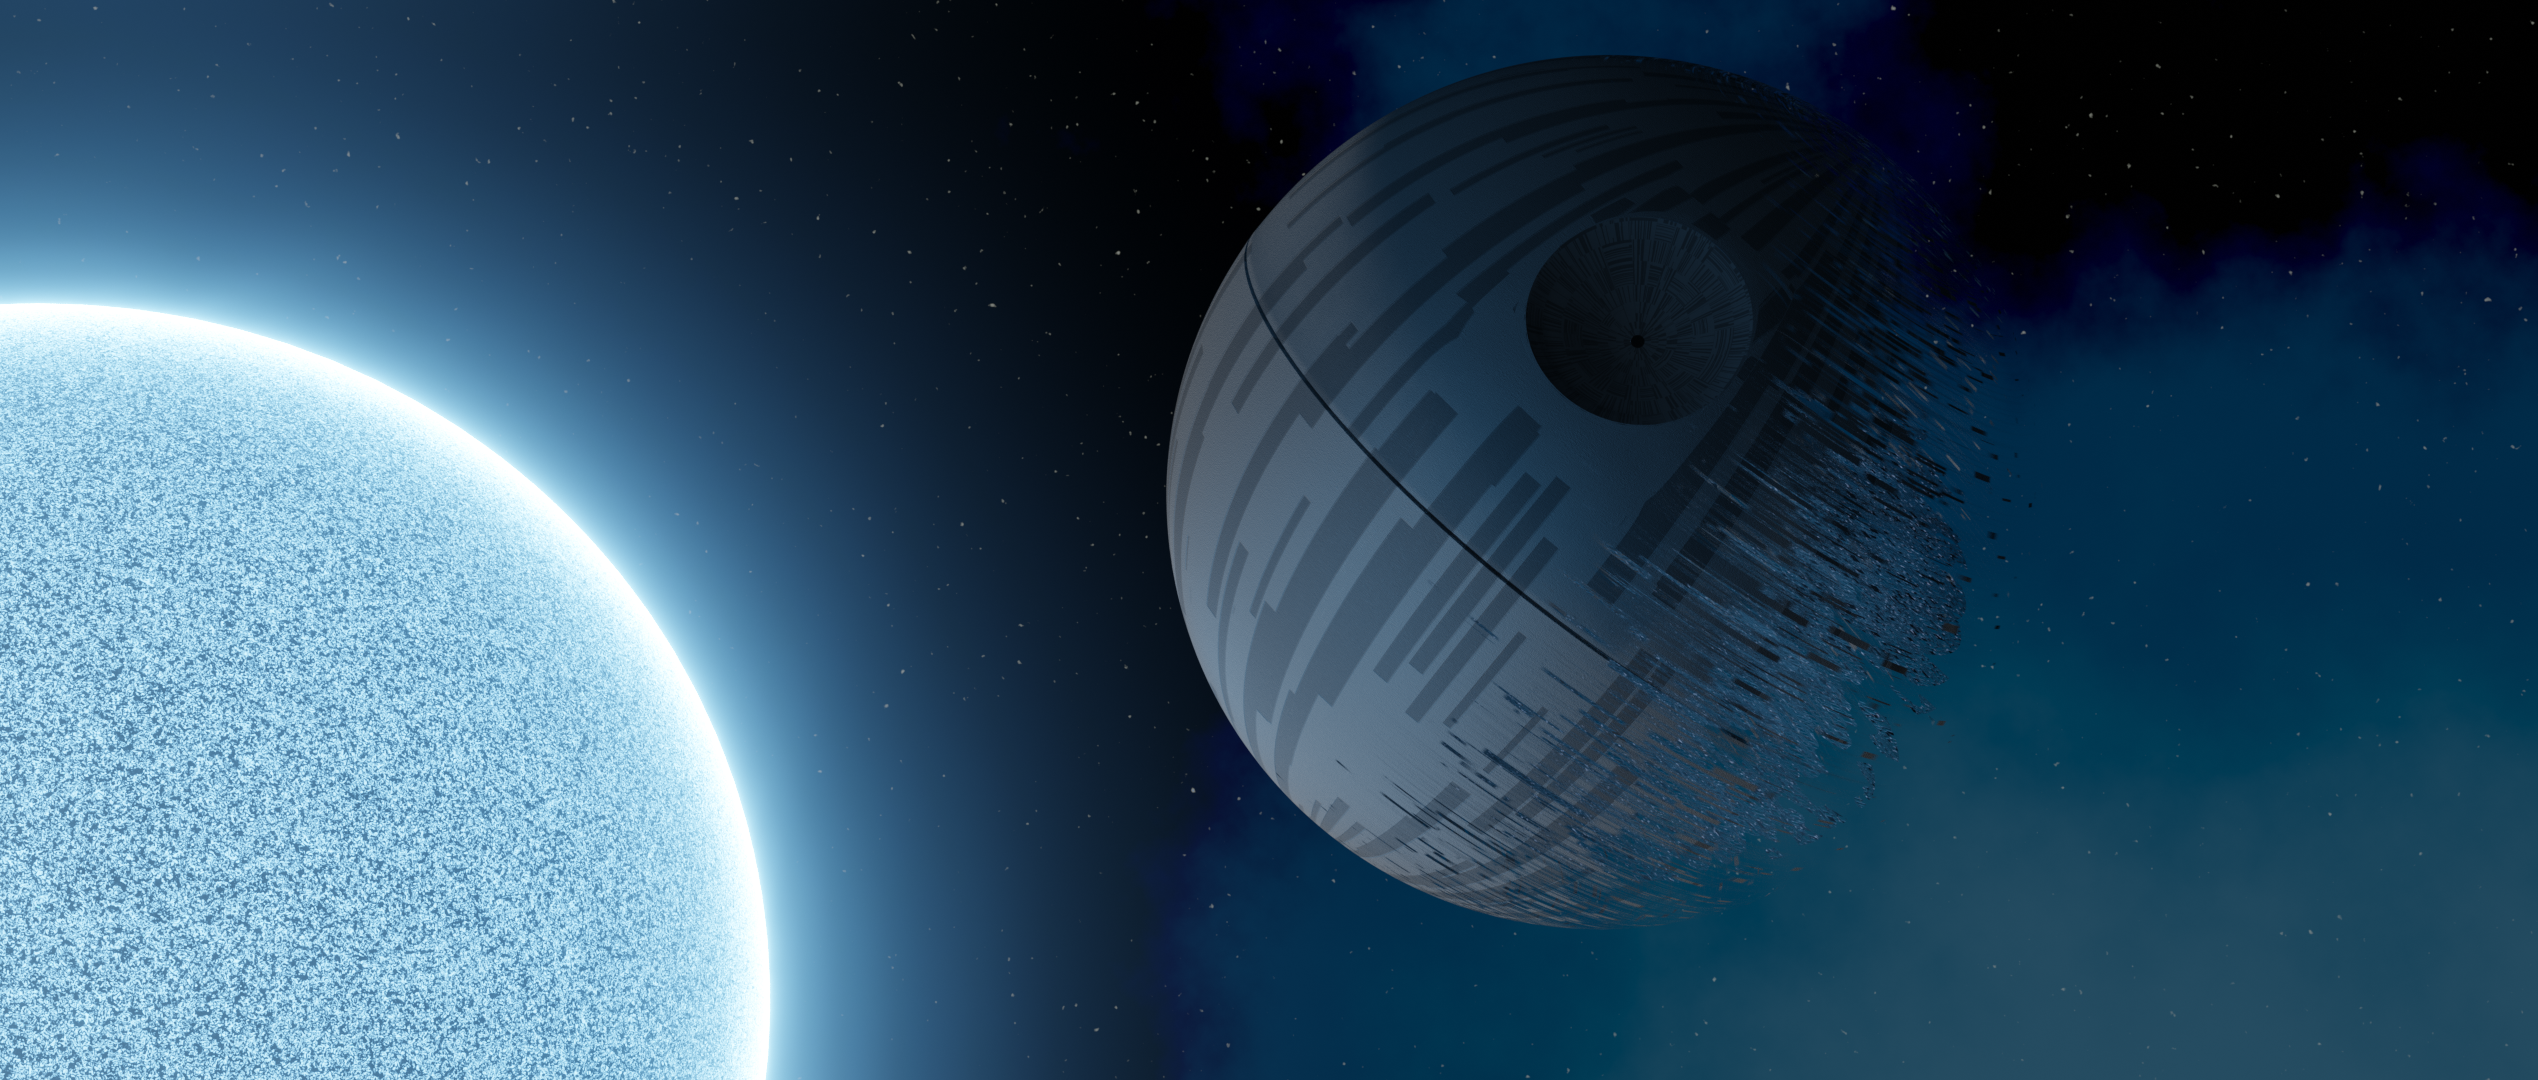 General 2538x1080 Star Wars space stars Blender Death Star Sun CGI science fiction space clouds space art